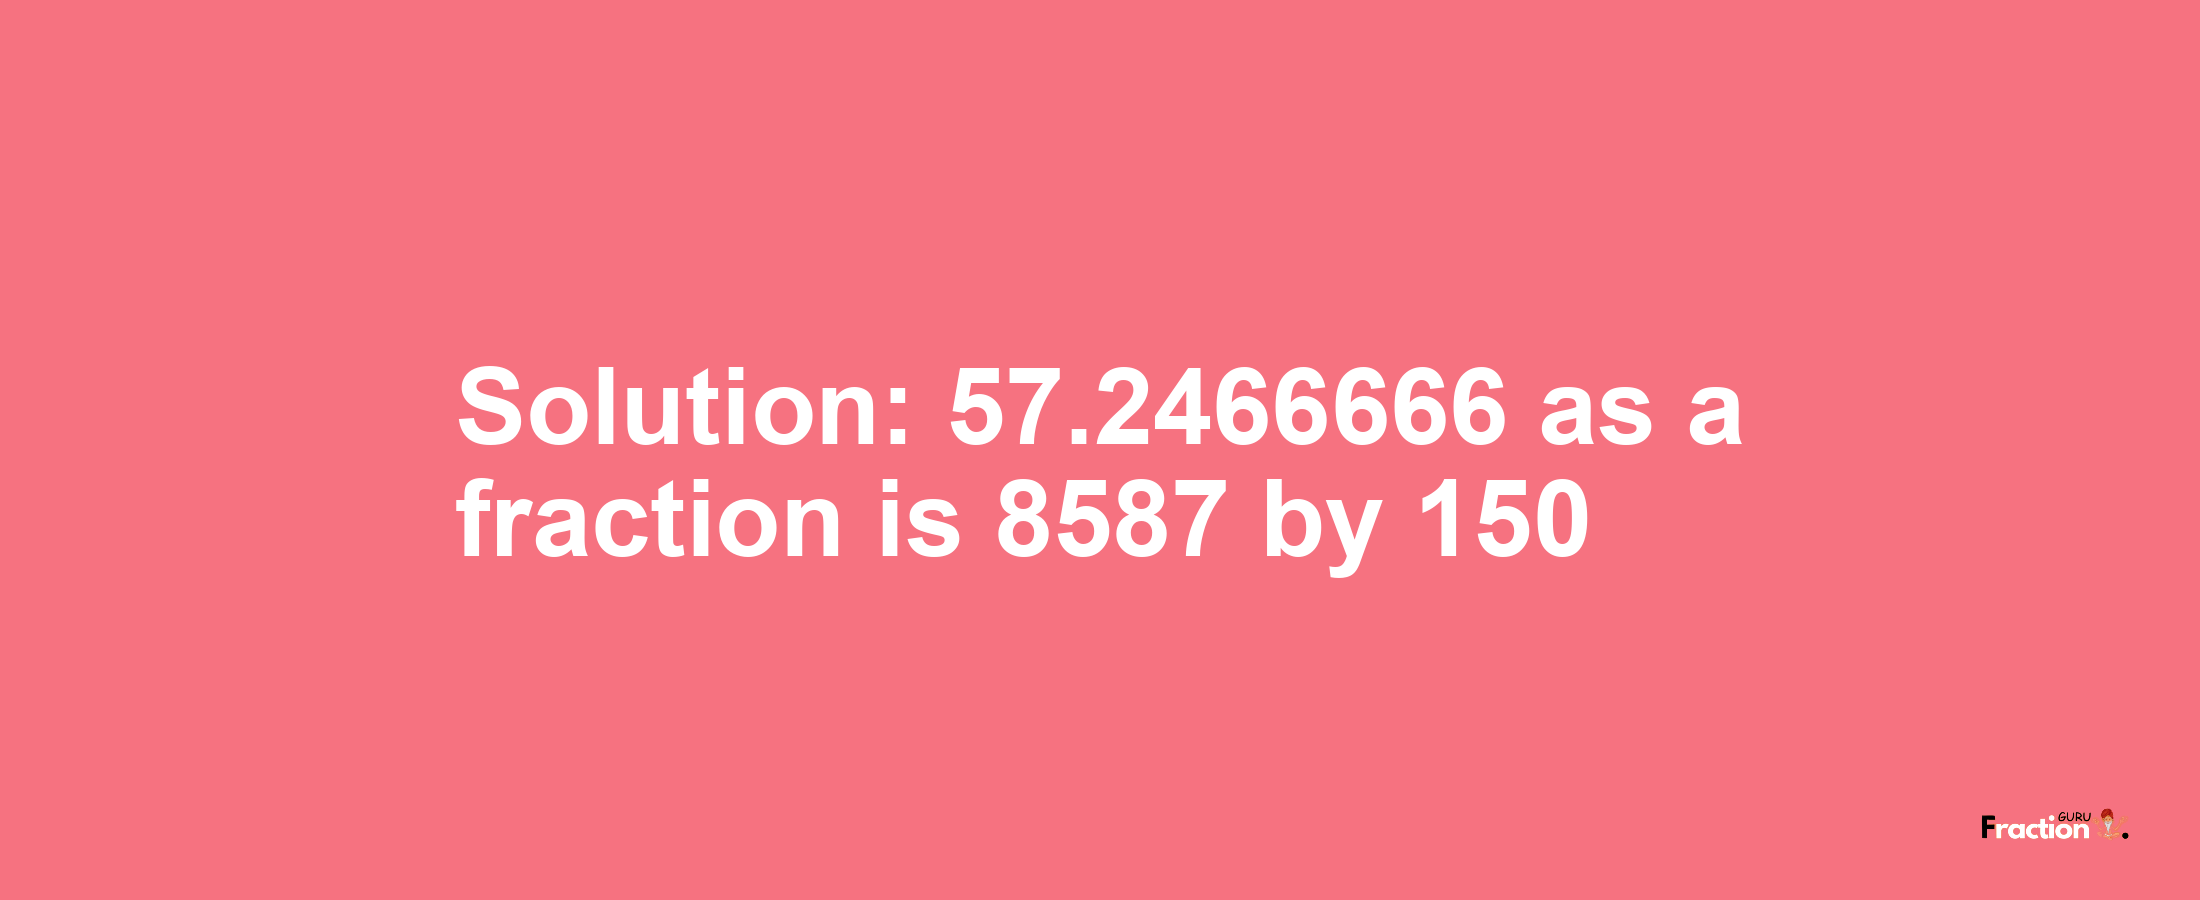 Solution:57.2466666 as a fraction is 8587/150